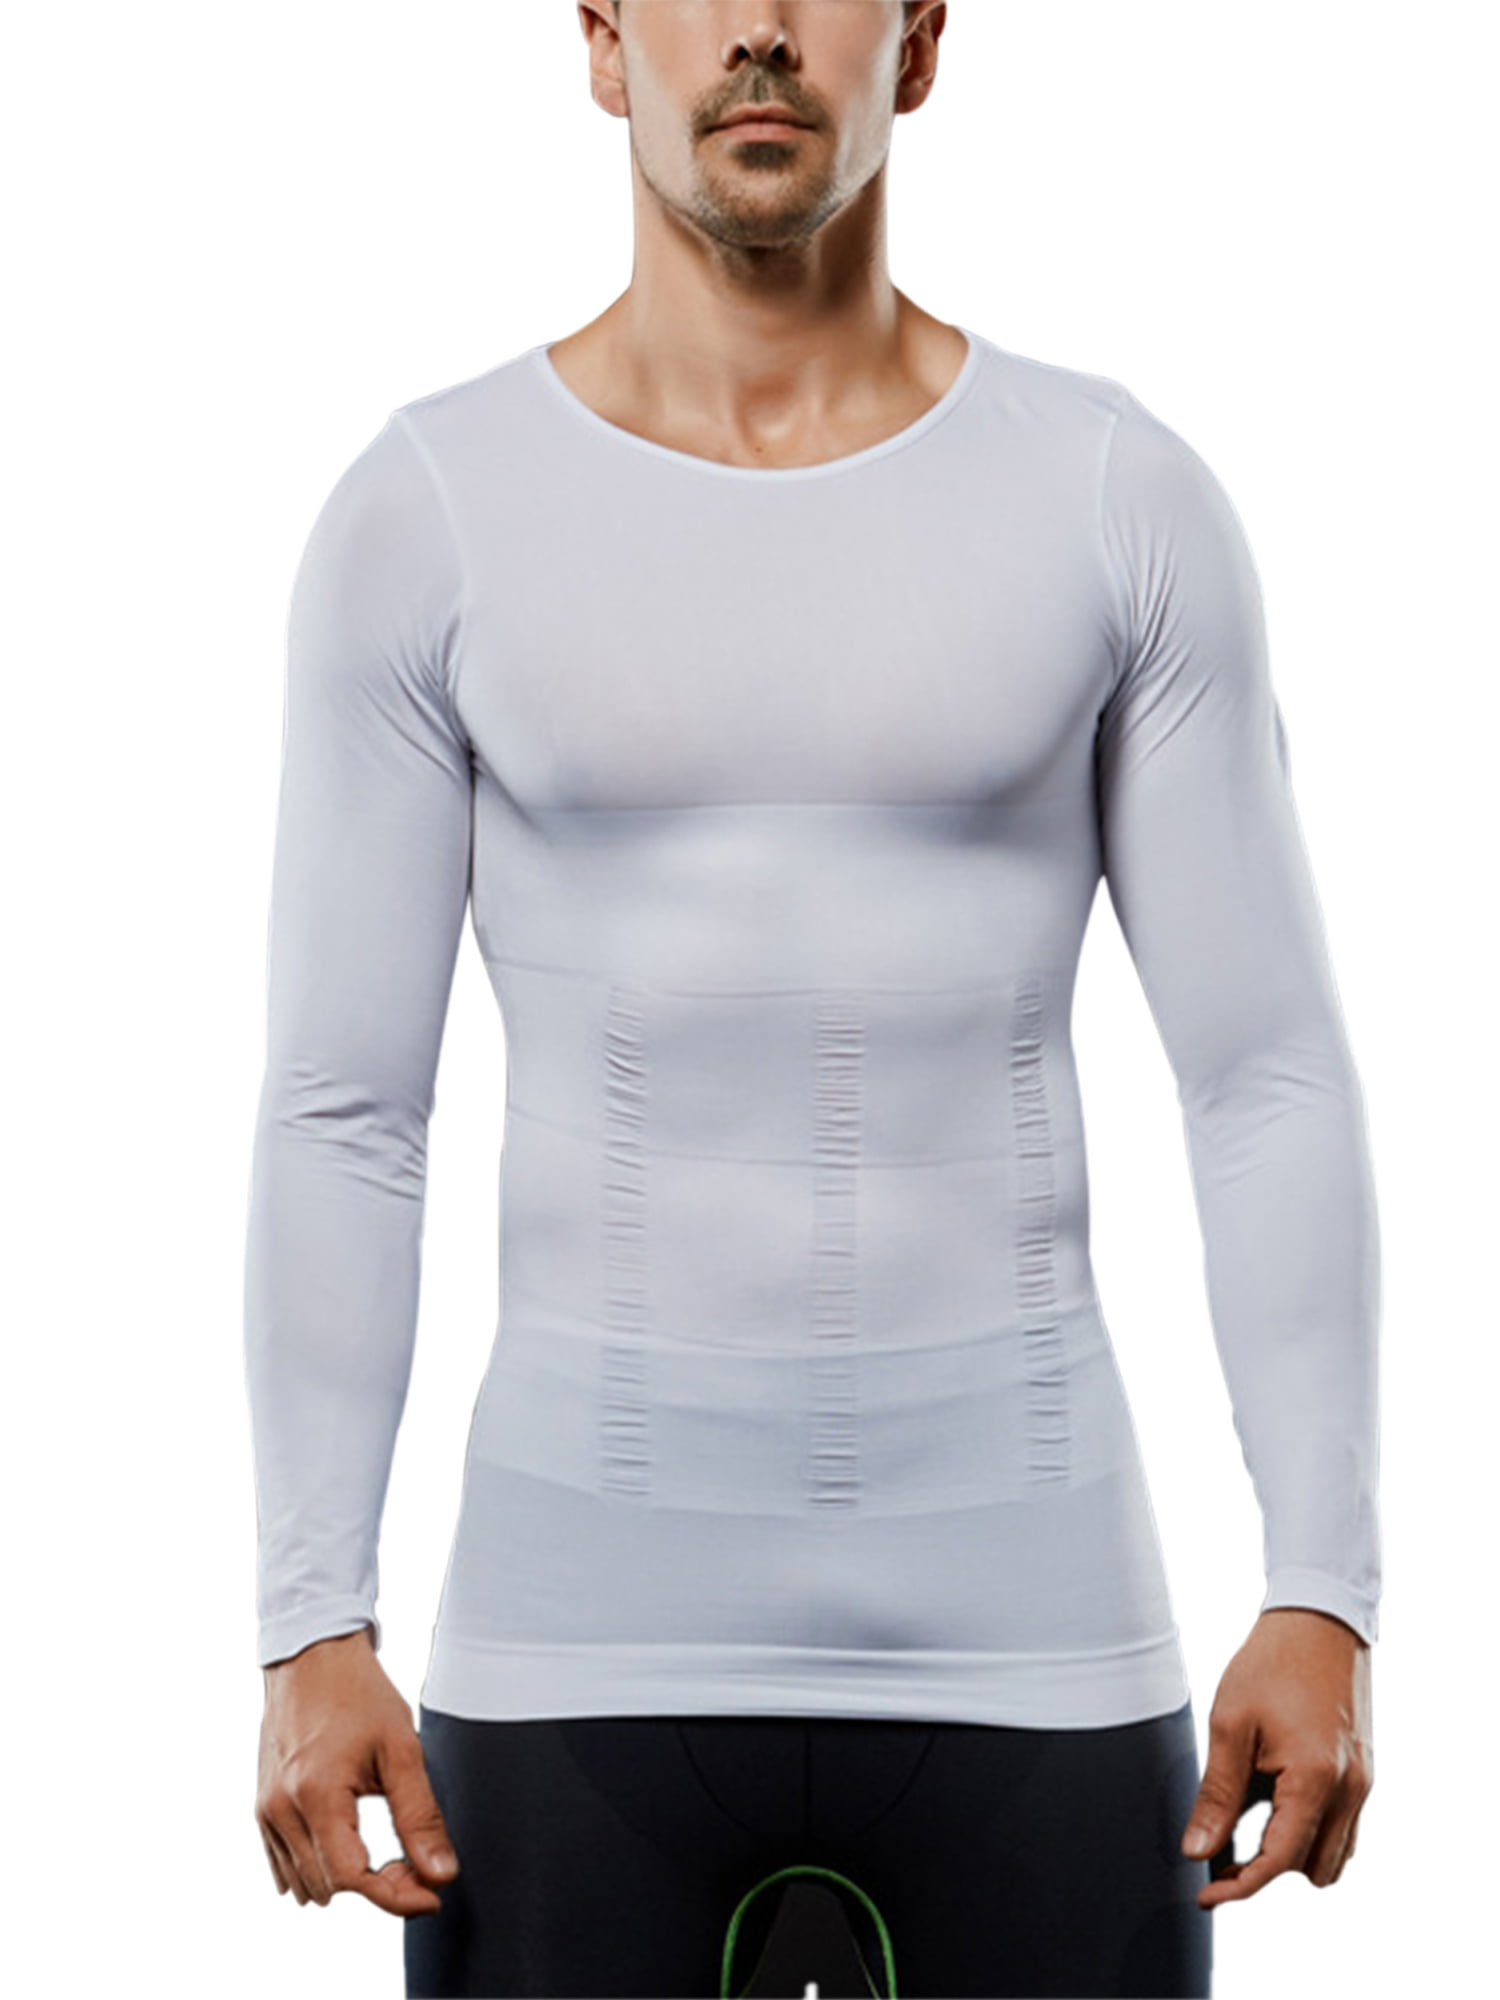 Men's Sports Compression Base Layer Slim Fit Tops Long Sleeve Quick Dry T-Shirt 